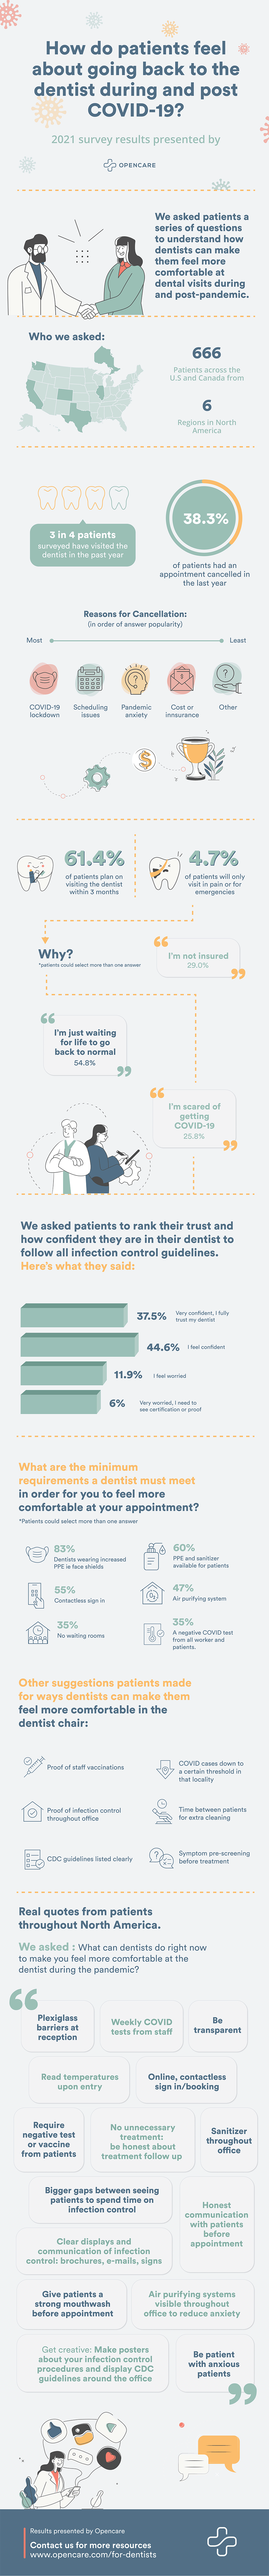 COVID-19-patient-survey-infographic-for-dentists